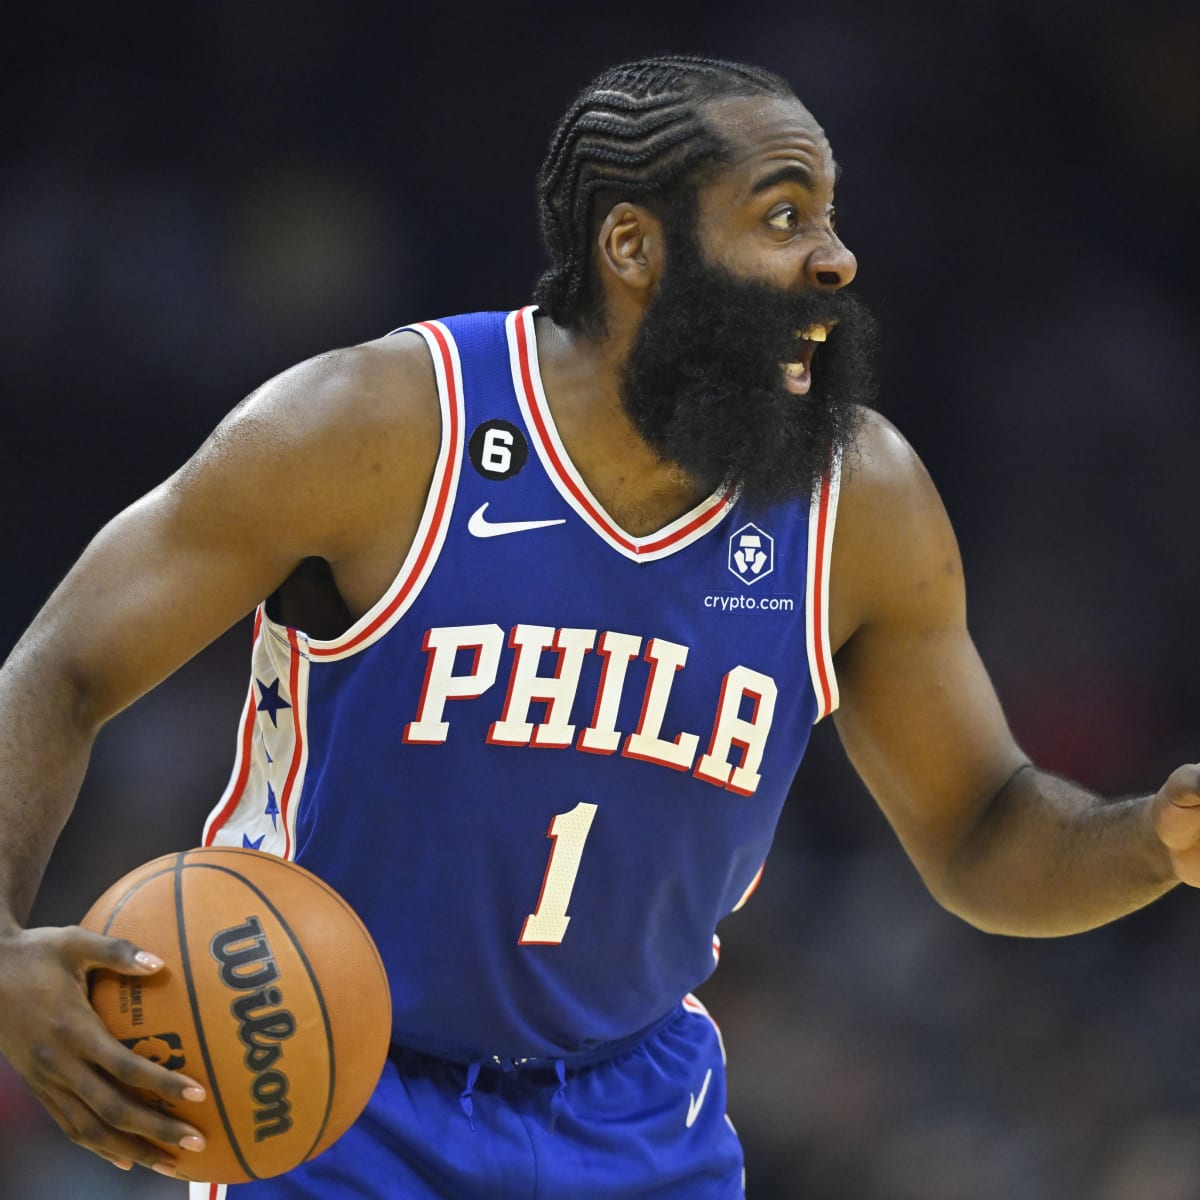 James Harden Outfit from March 8, 2022, WHAT'S ON THE STAR?